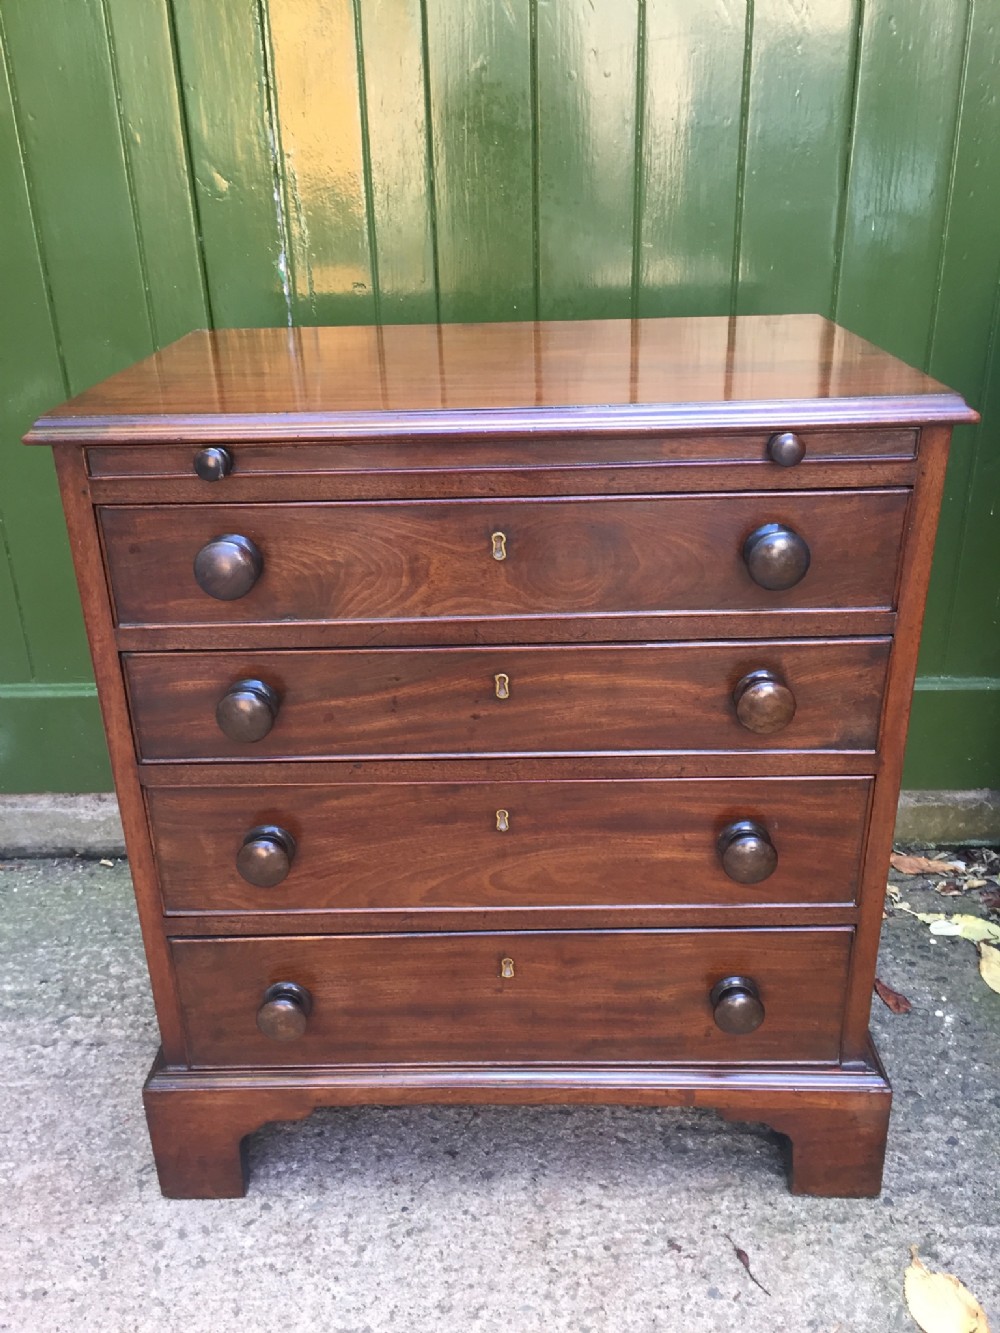 neat c19th mahogany chest of drawers of late c18th design